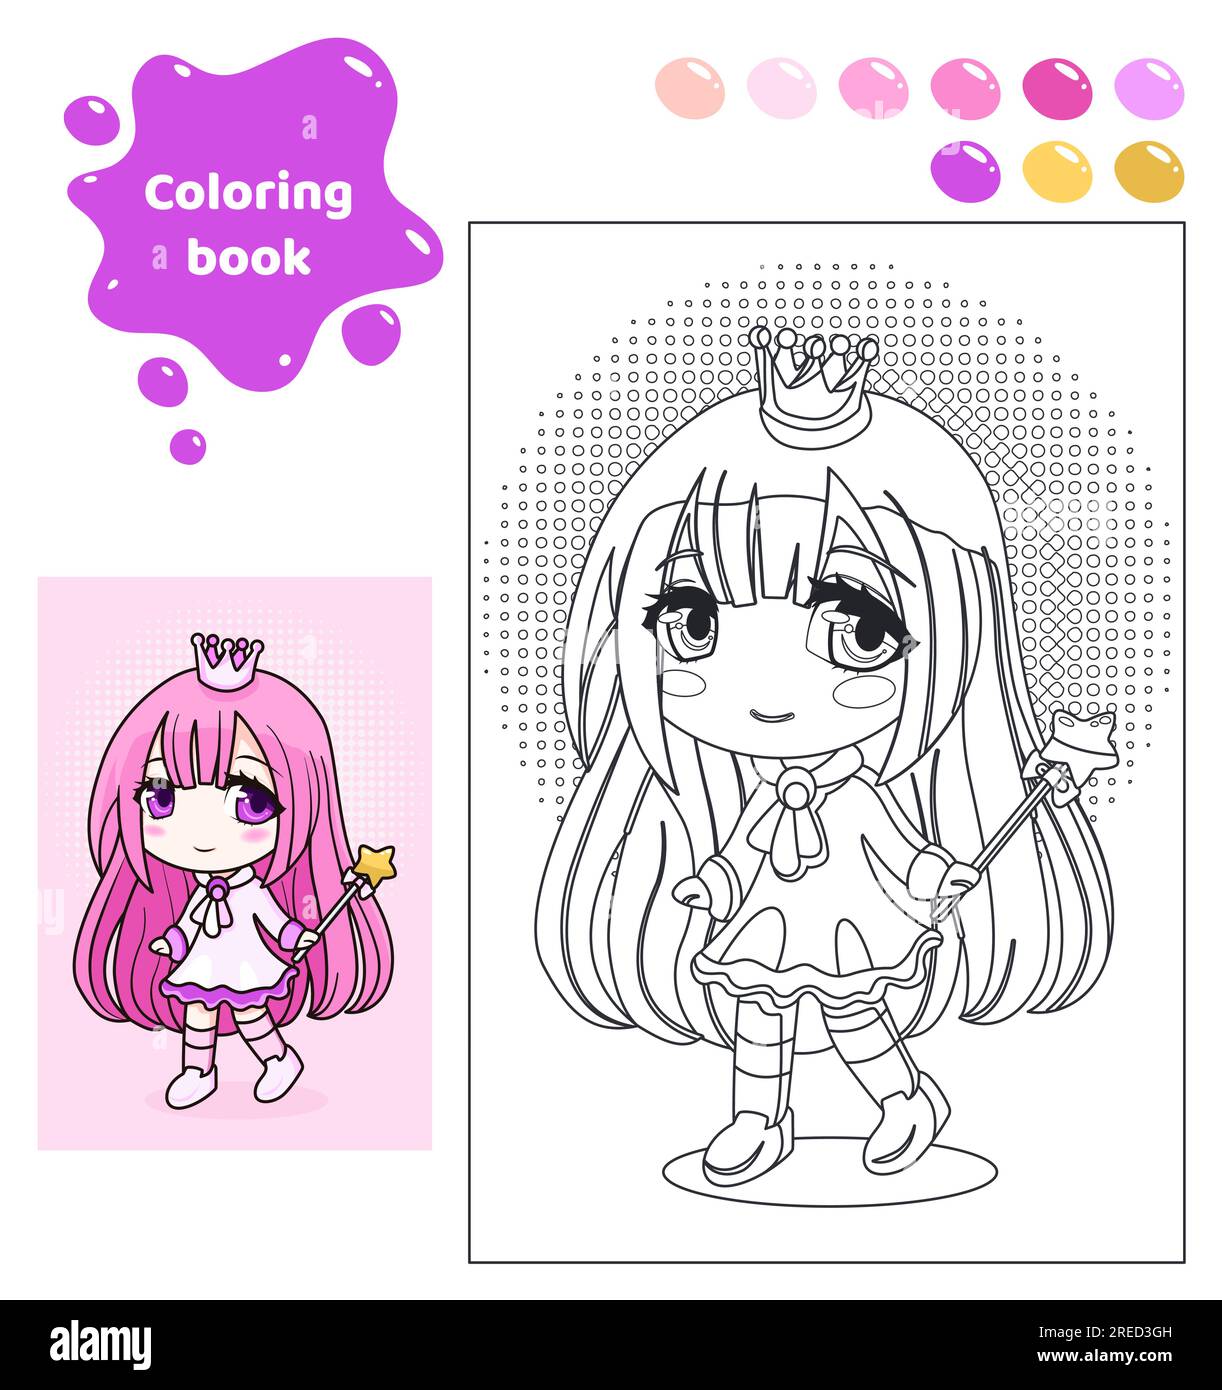 https://c8.alamy.com/comp/2RED3GH/coloring-book-for-kids-anime-girl-with-crown-2RED3GH.jpg